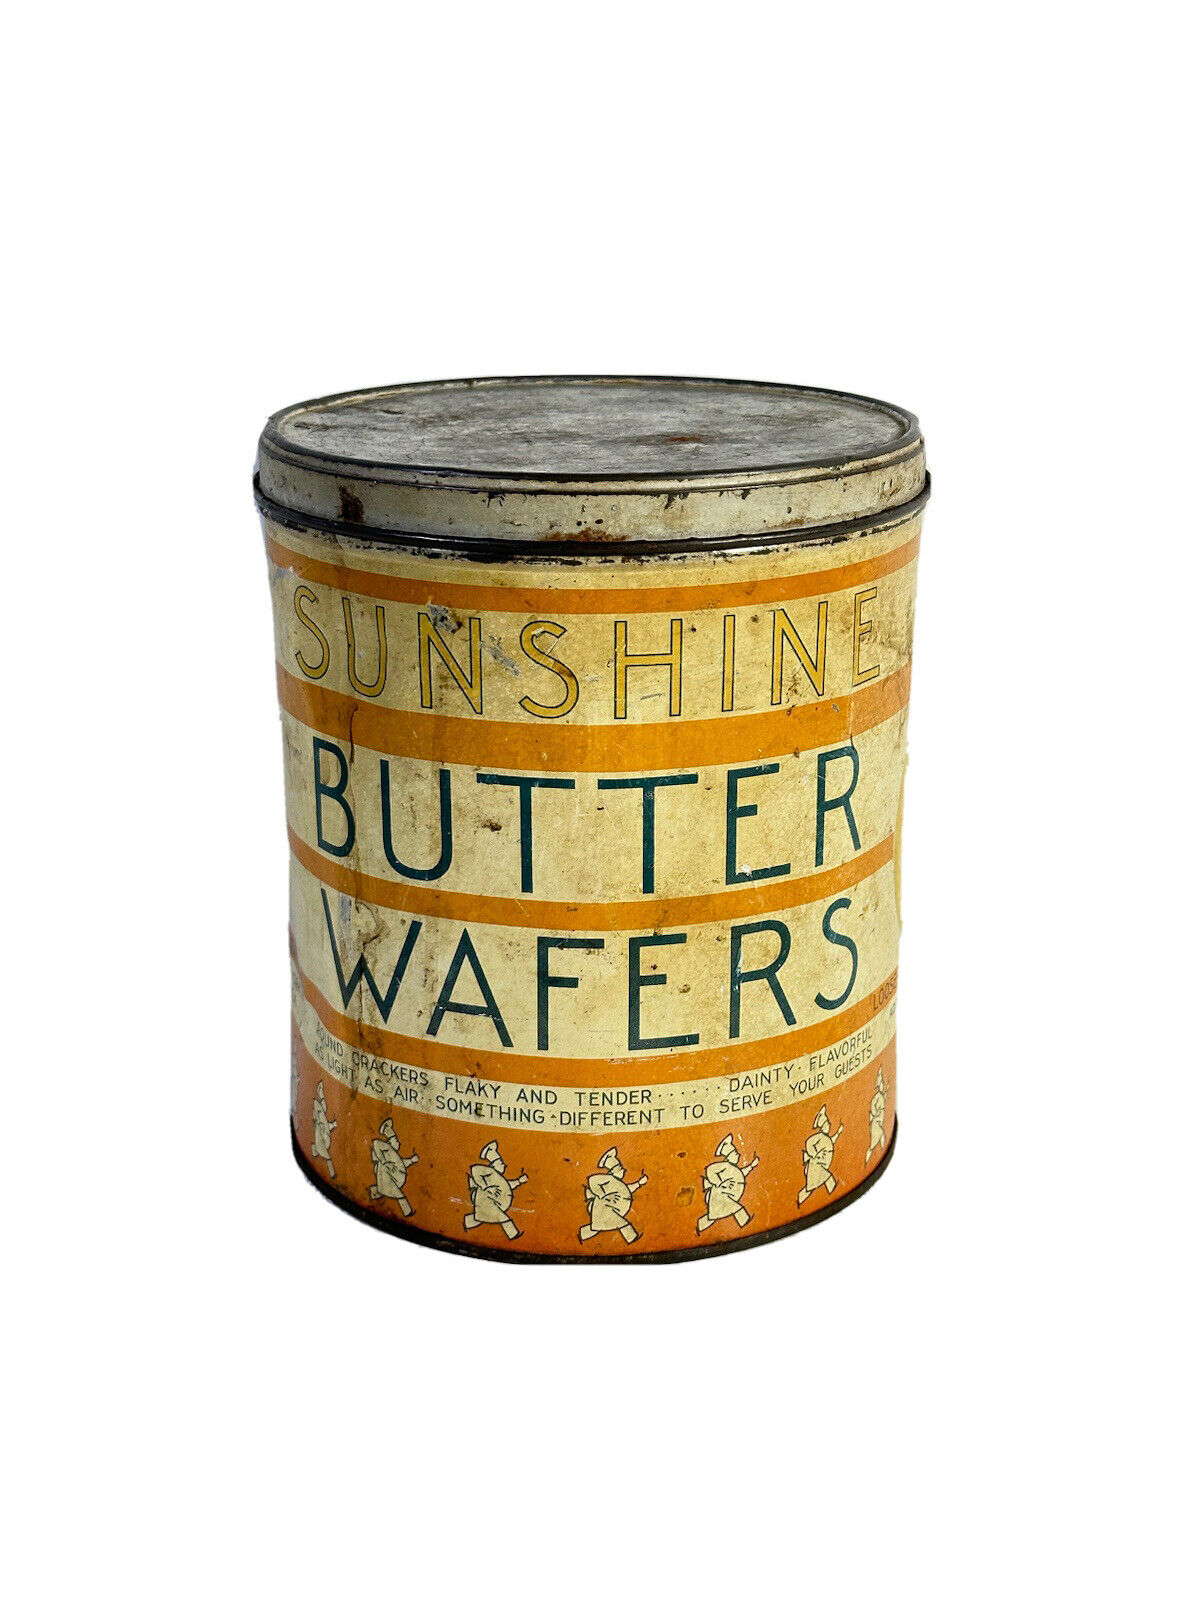 1940’s Vtg SUNSHINE BUTTER WAFERS Tin Can, Loose-Wiles Biscuit Co in NYC